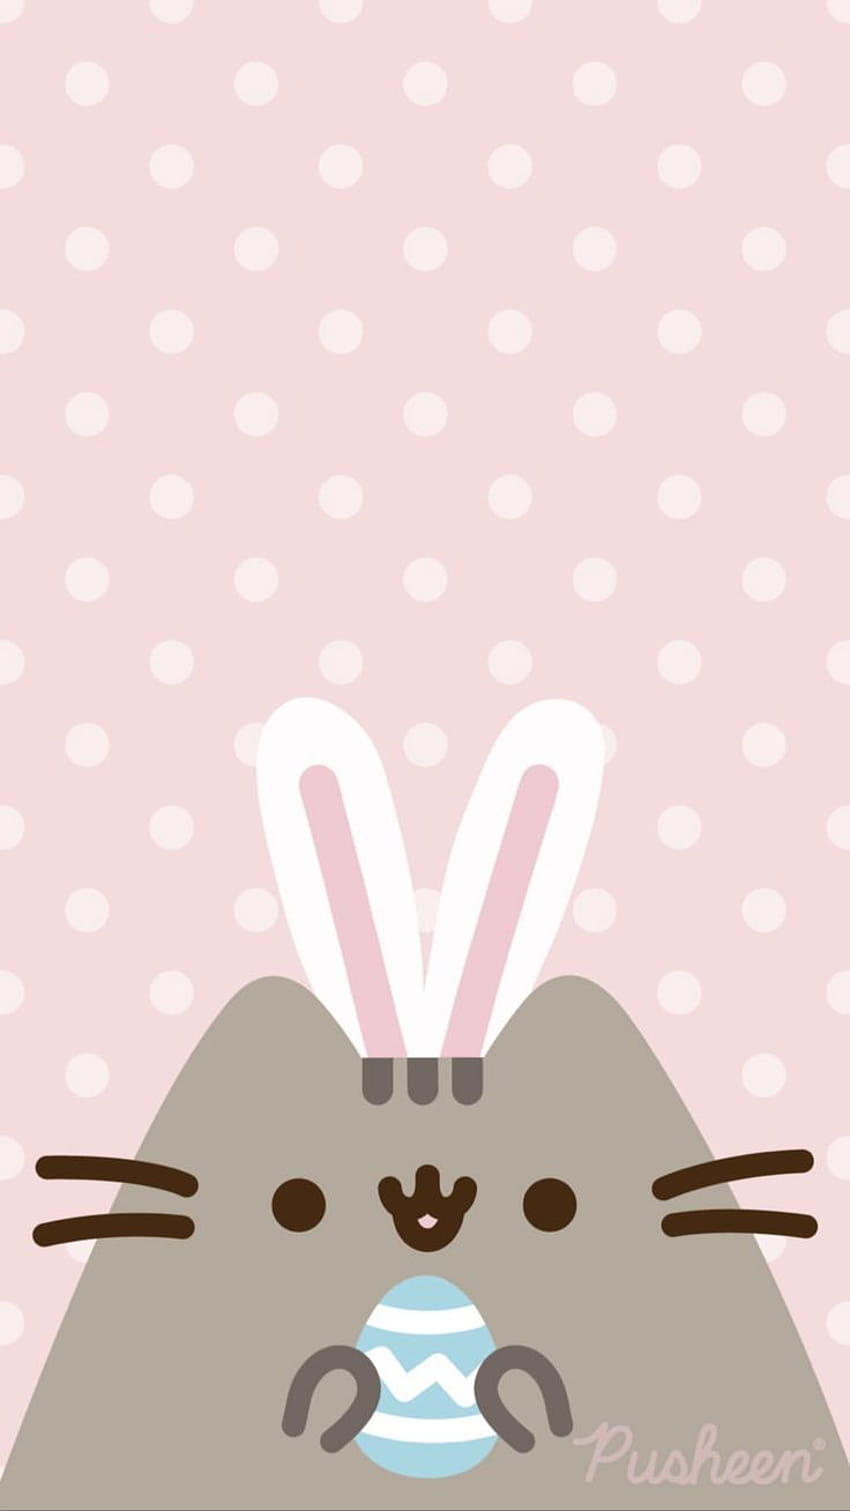 Pusheen the cat floral pastels spring iphone Easter bunny, iphone cat easter HD phone wallpaper